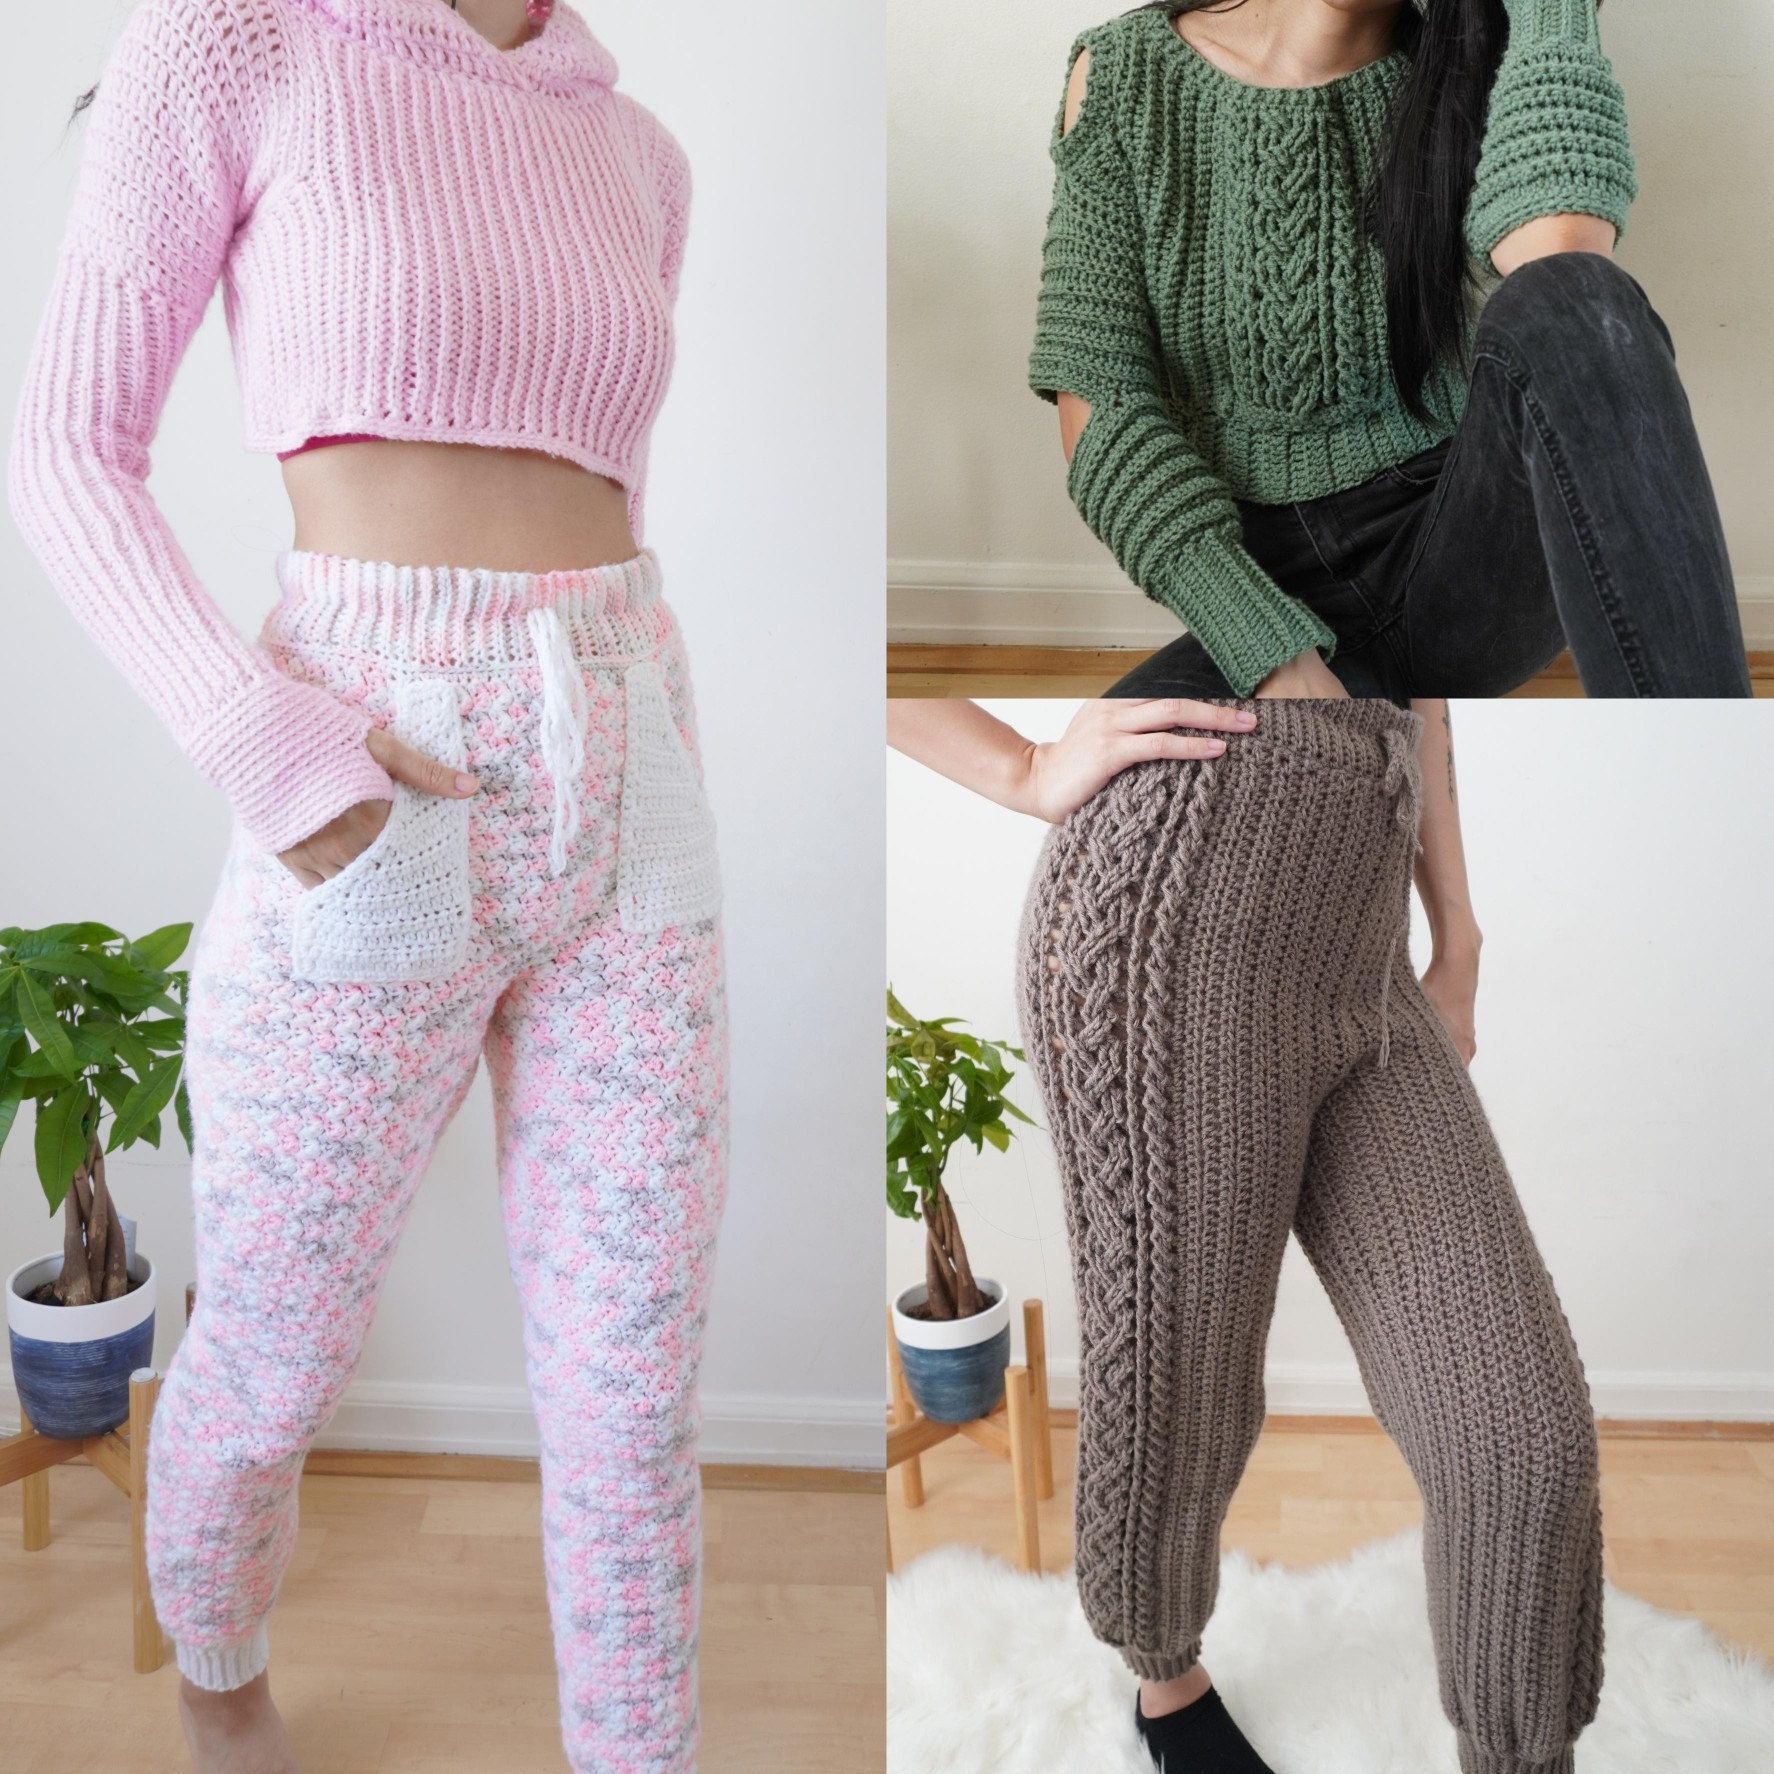 Crochet Cropped Hoodie and High Waisted Sweats Pattern Bundle - Crochet Cropped Hoodie and High Waisted Sweats Pattern Bundle -   19 diy Clothes boho ideas